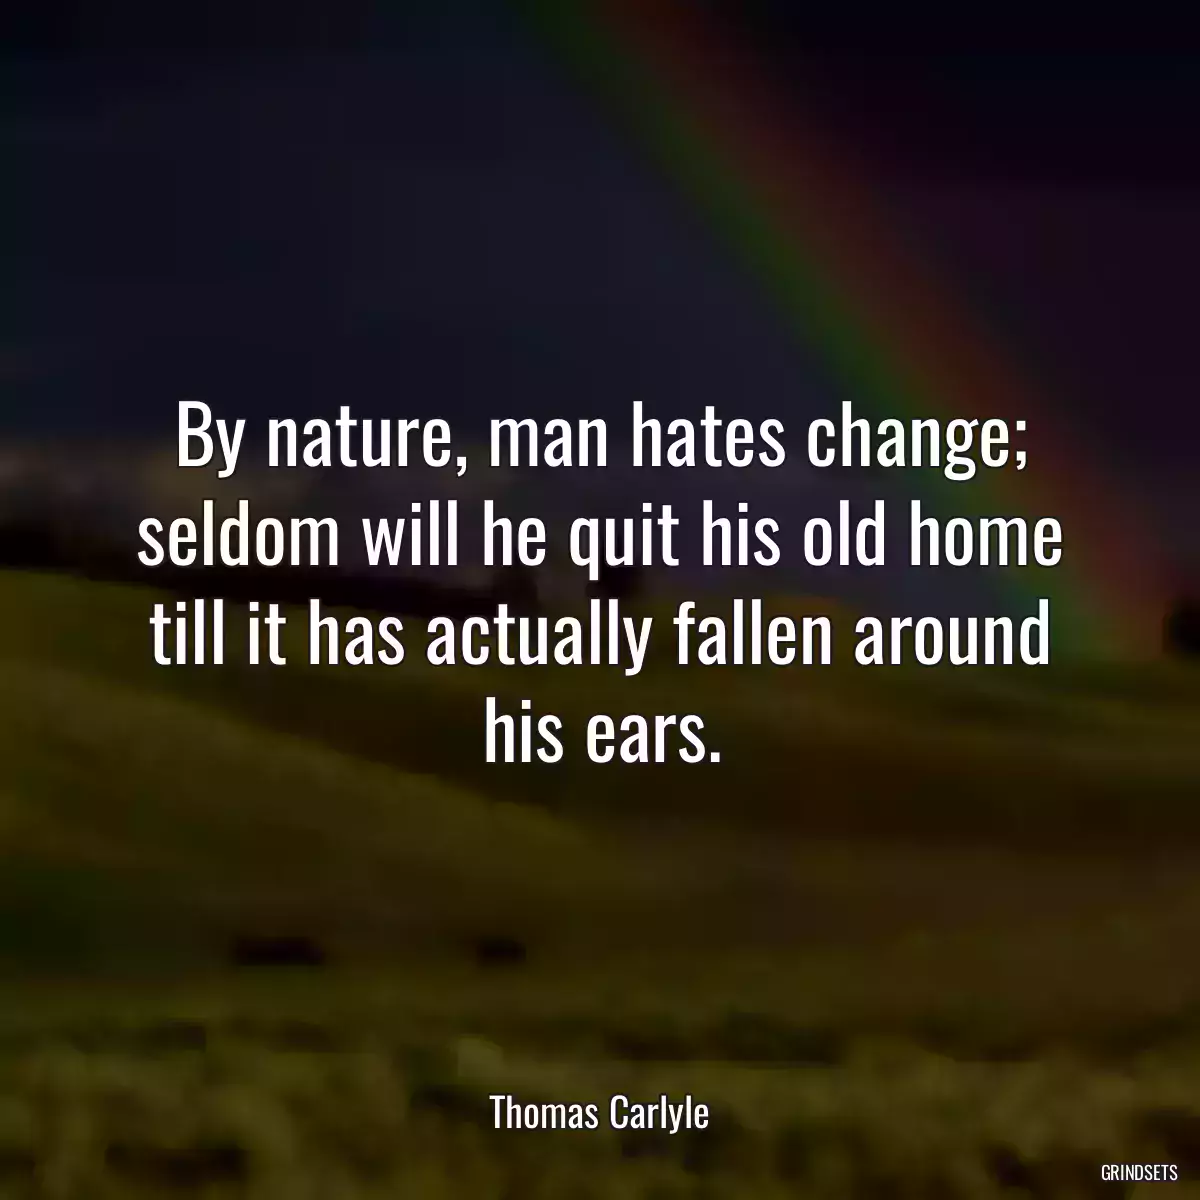 By nature, man hates change; seldom will he quit his old home till it has actually fallen around his ears.